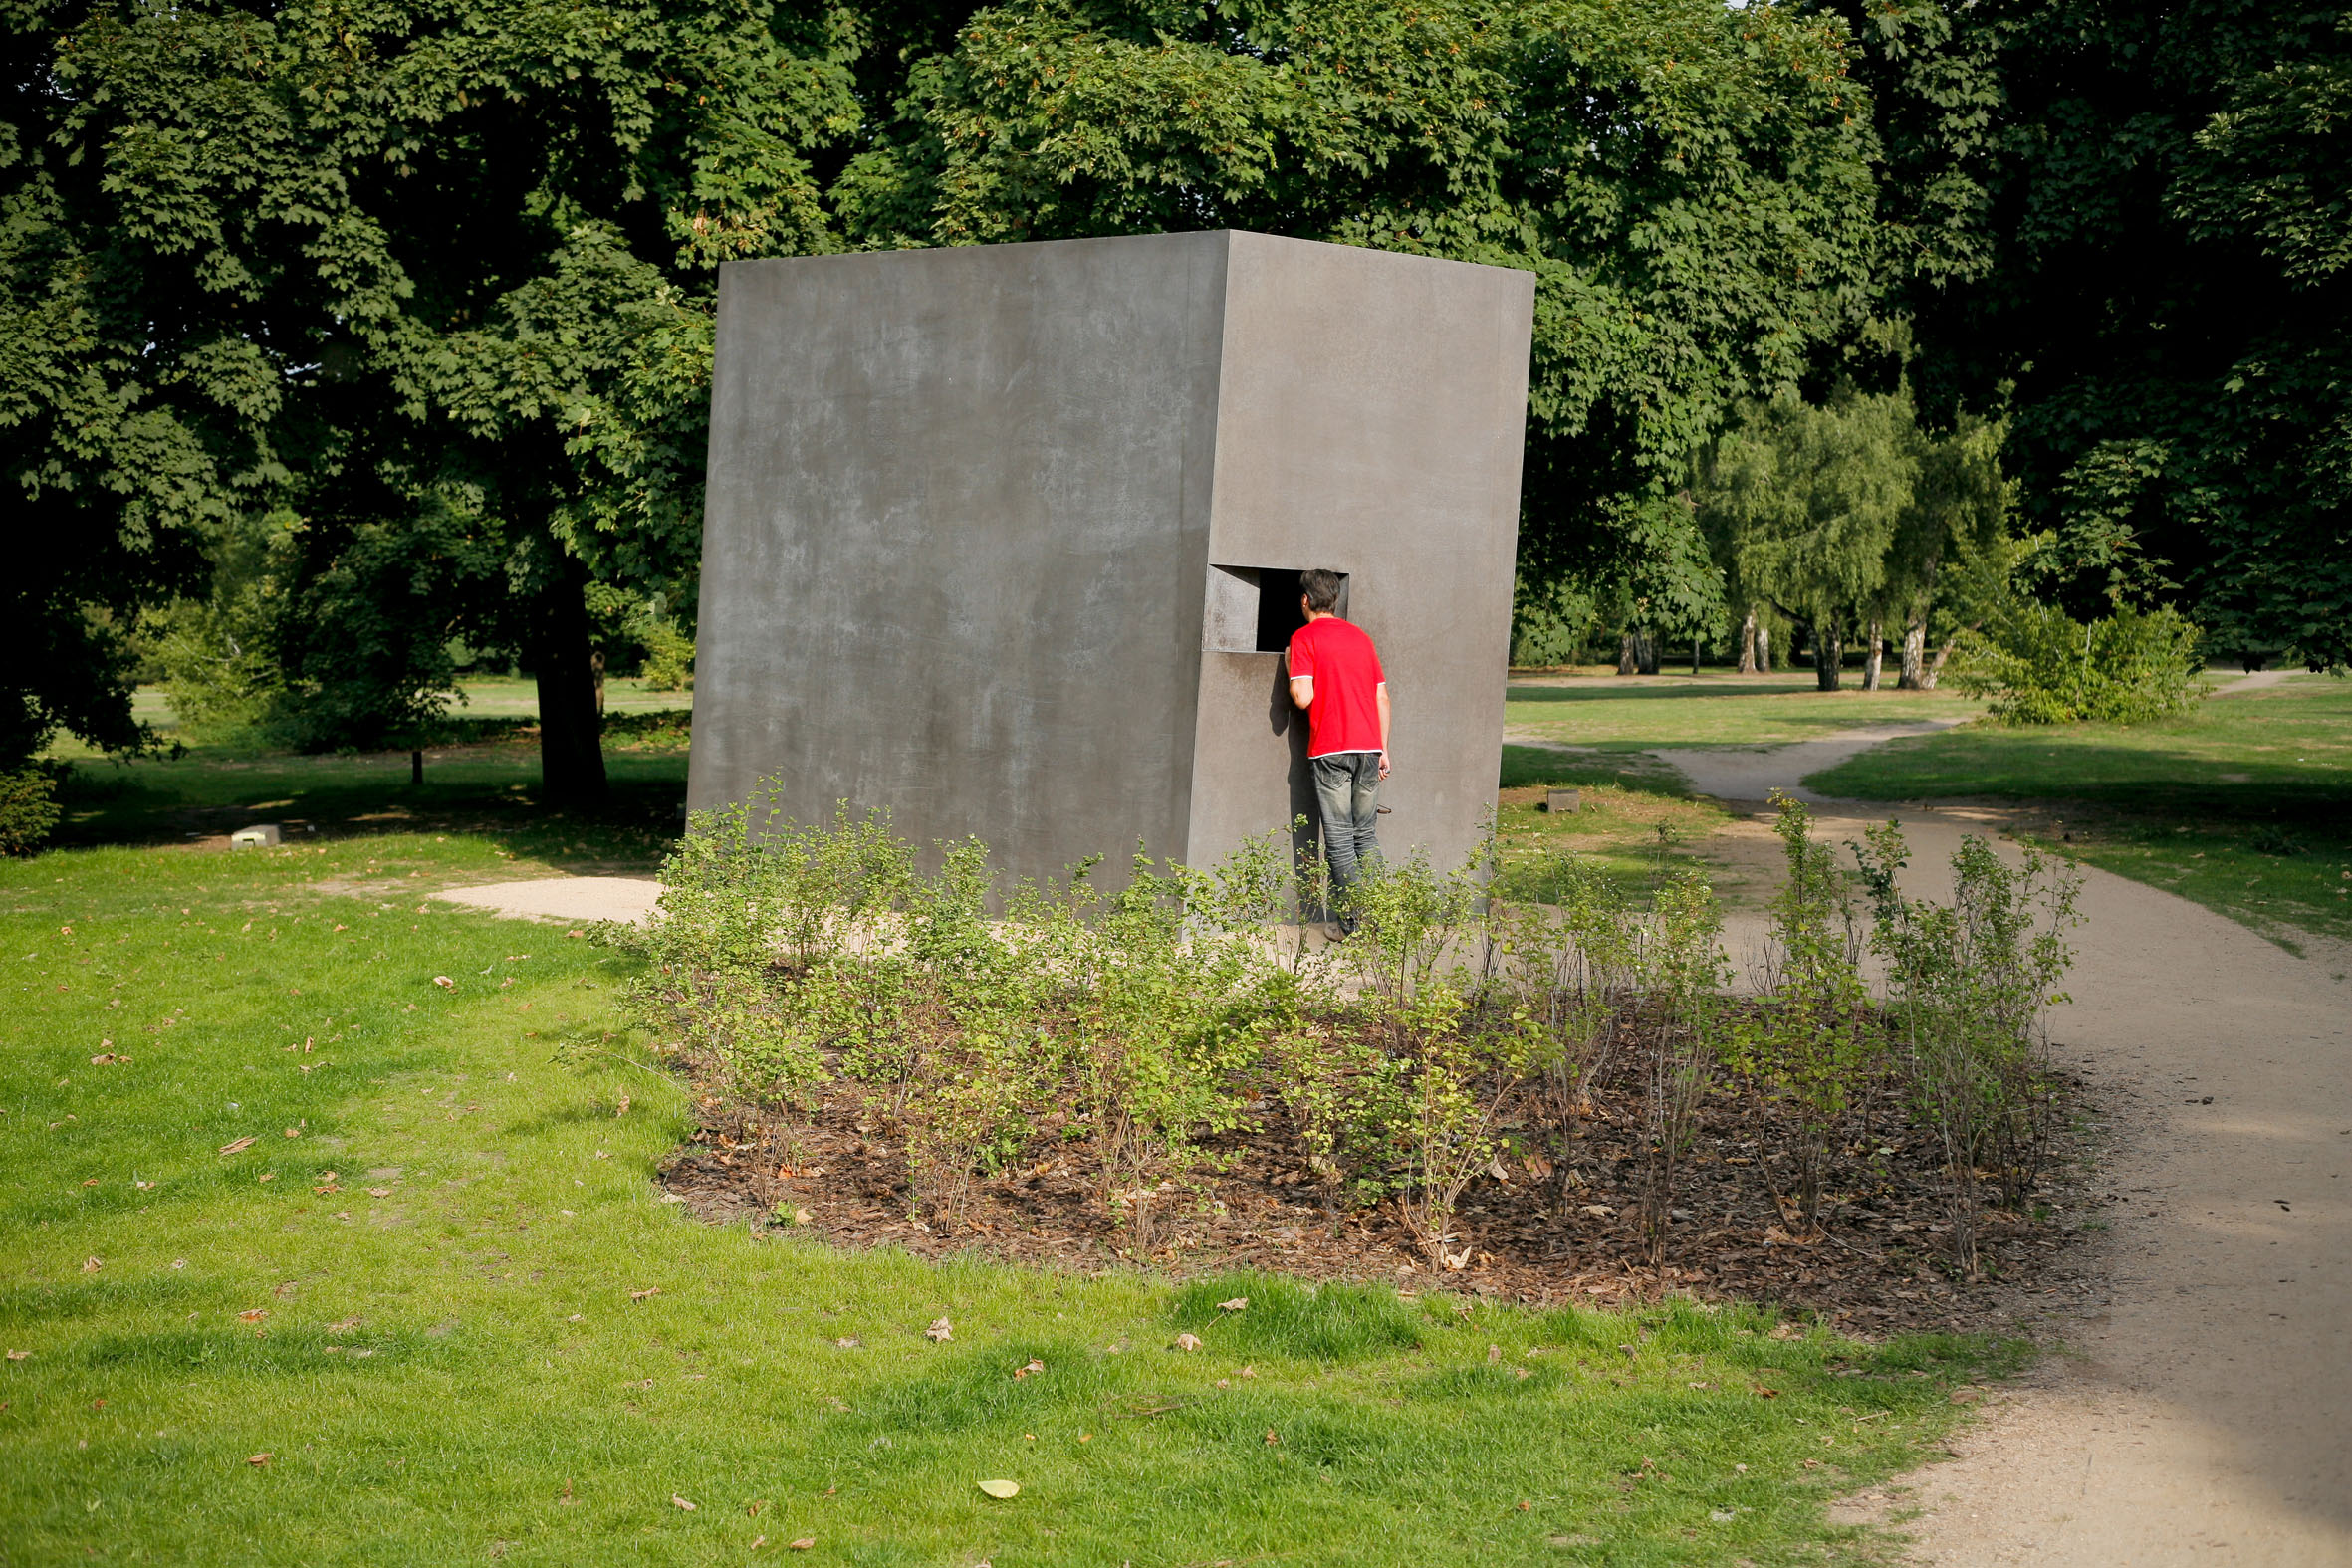 must-see LGBTQ2S+ monuments: Memorial to the Persecuted Homosexuals Under National Socialism